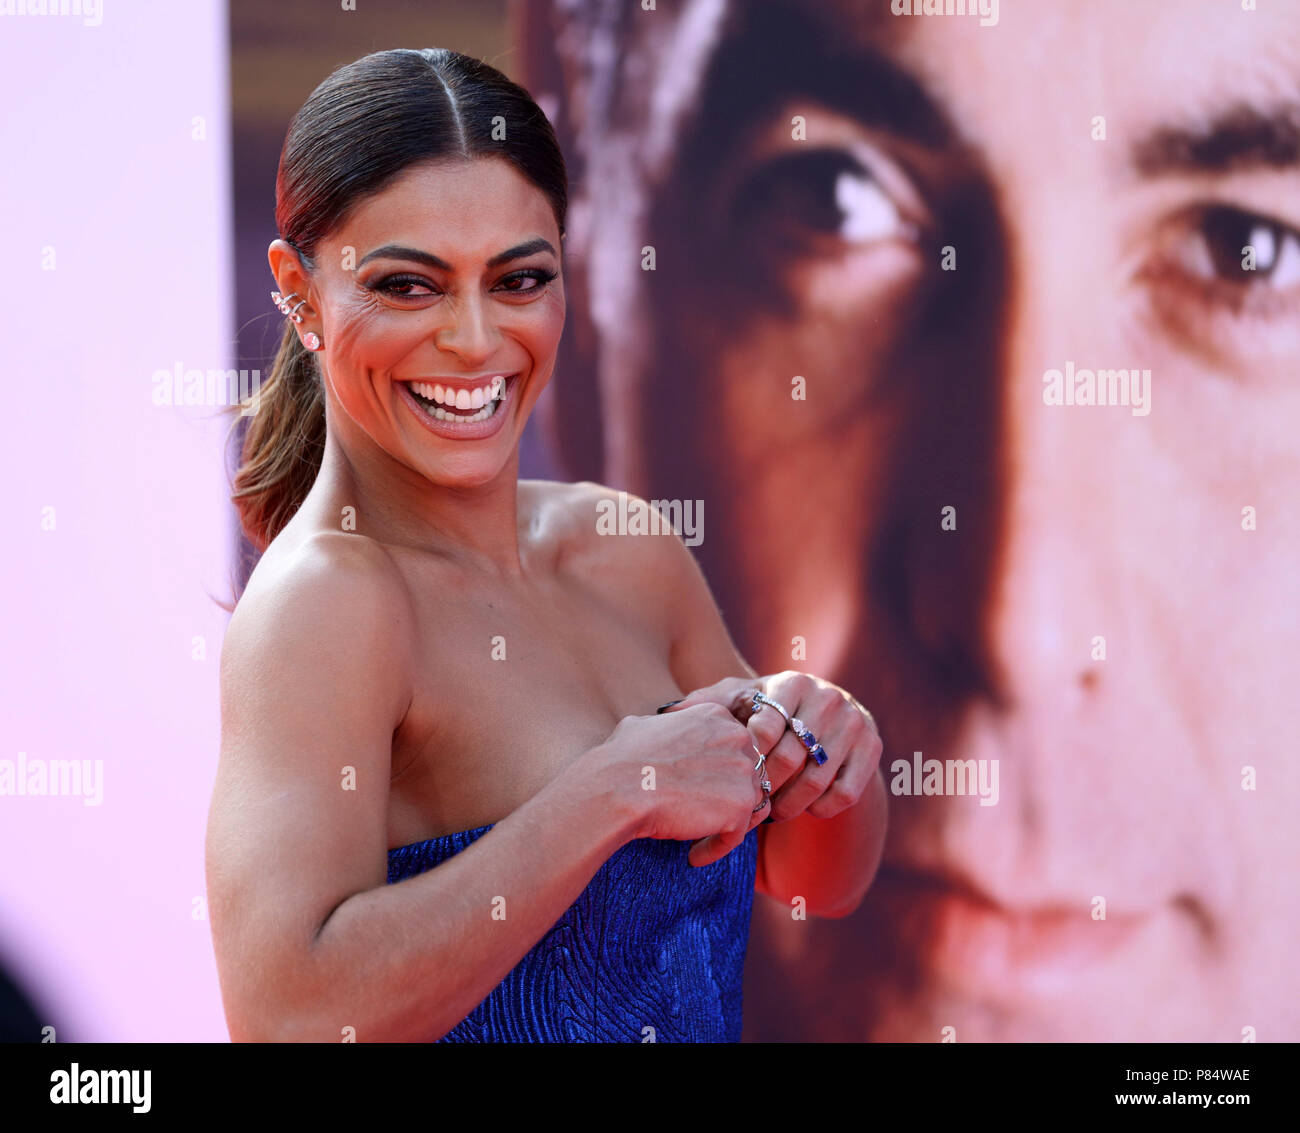 Celebrities attend 46th AFI Life Achievement Award Gala Tribute honoring George Clooney at Dolby Theatre.  Featuring: Juliana Paes Where: Los Angeles, California, United States When: 07 Jun 2018 Credit: Brian To/WENN.com Stock Photo